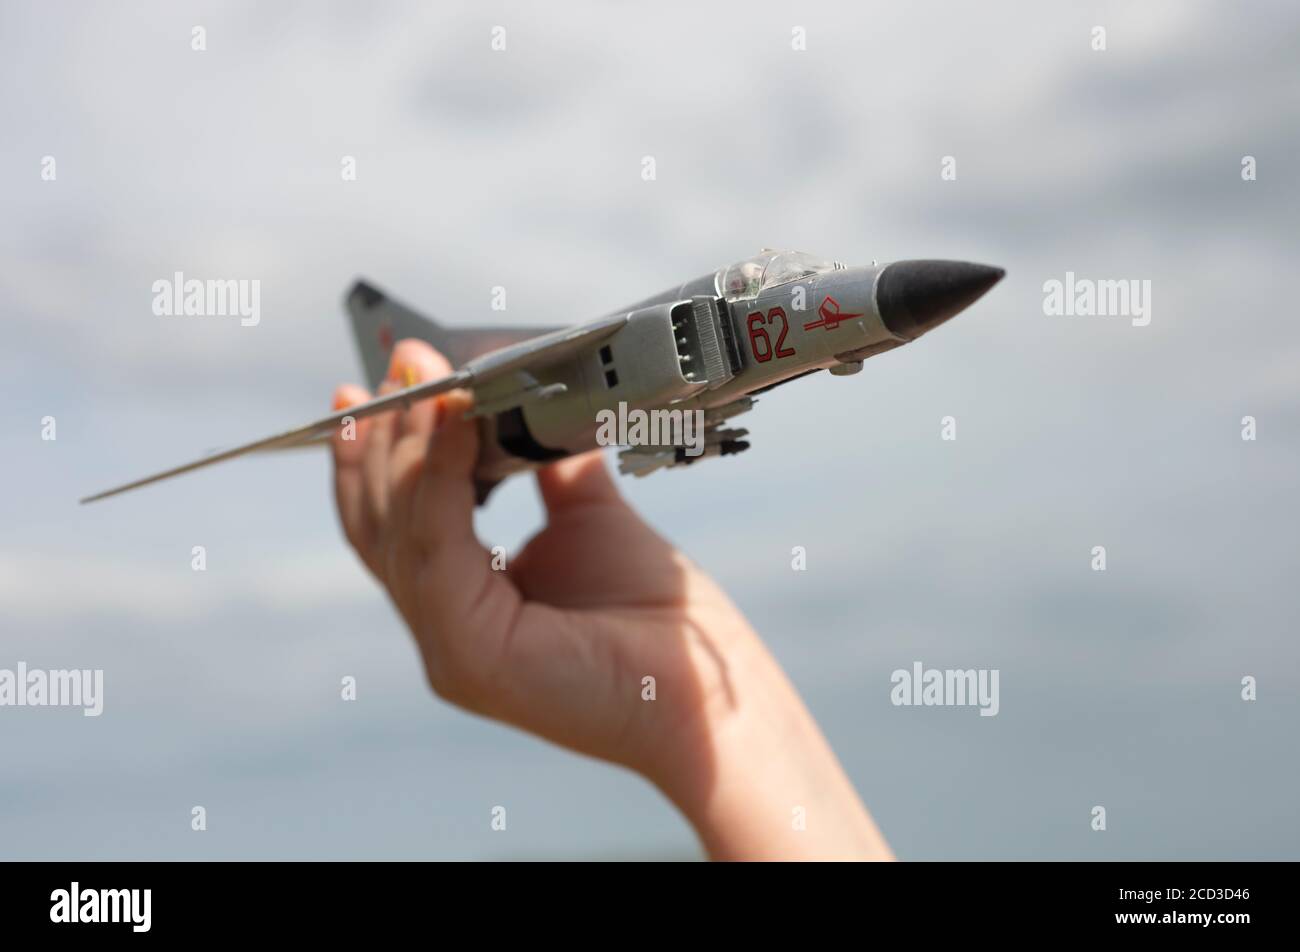 1/72 scale Mig-23 model aircraft Stock Photo